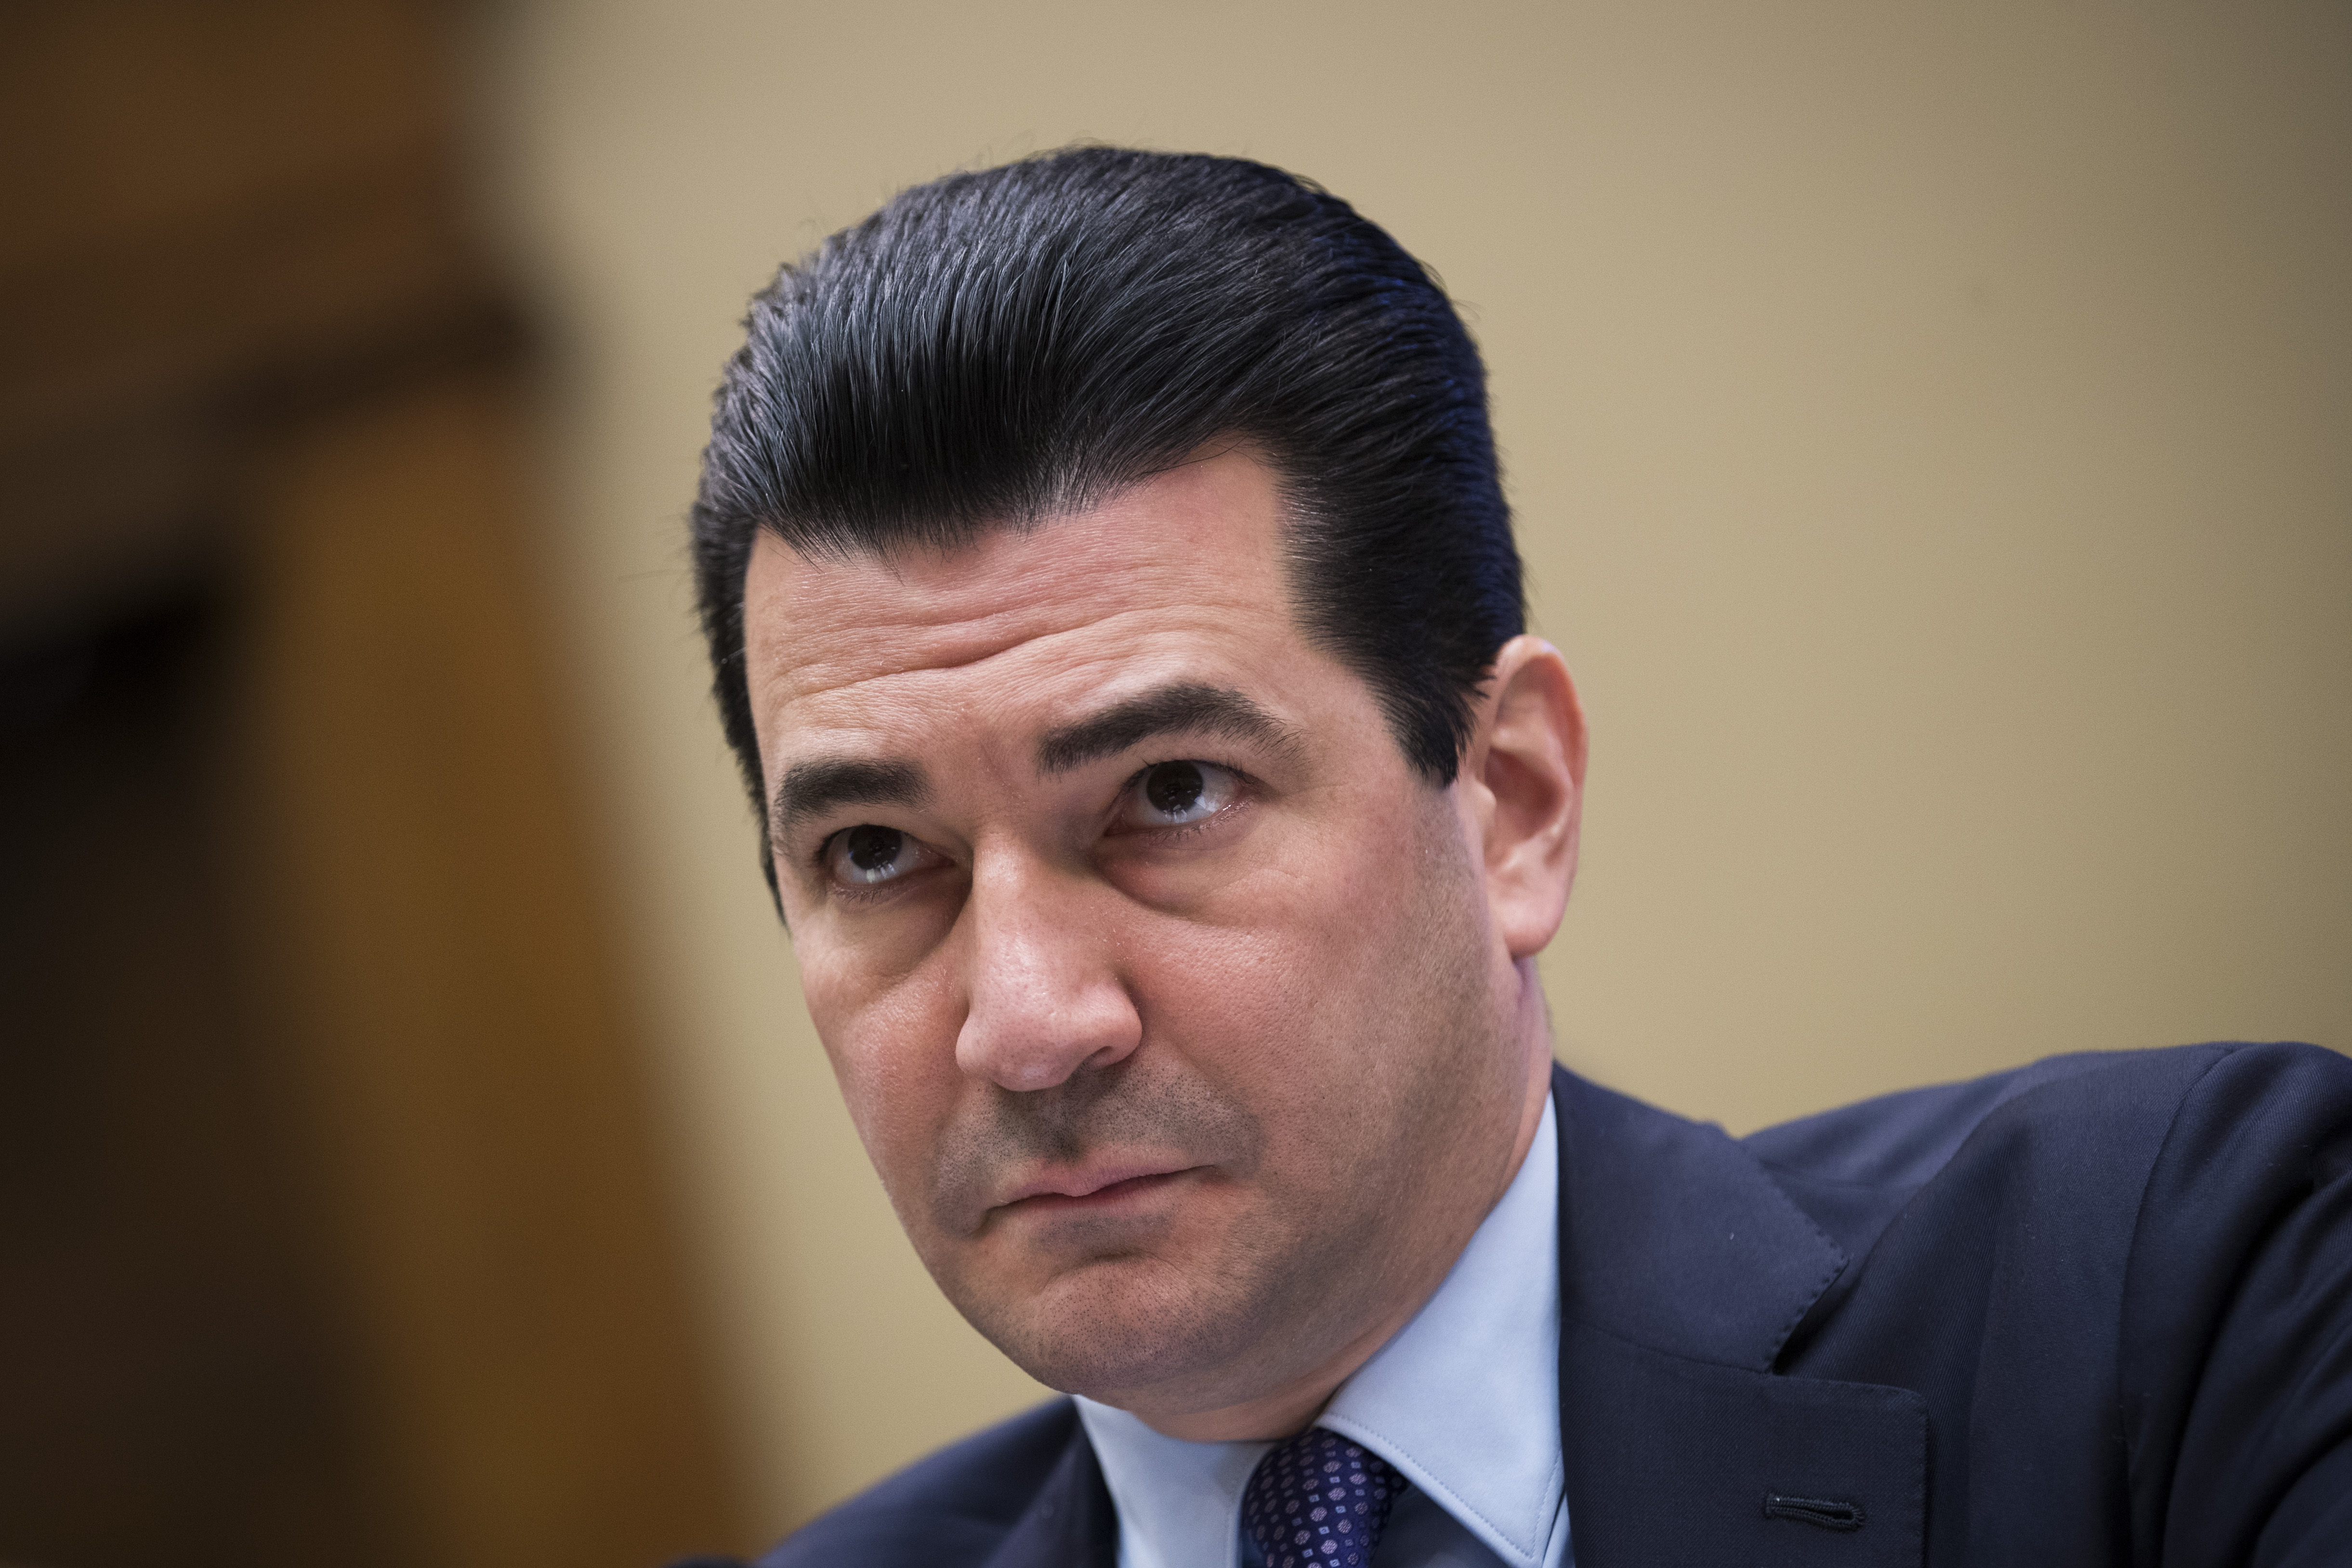 Dr. Scott Gottlieb, commissioner of the Food and Drug Administration (FDA), testifies during a House Energy and Commerce Committee hearing concerning federal efforts to combat the opioid crisis, October 25, 2017 in Washington, DC. Drew Angerer/Getty Images